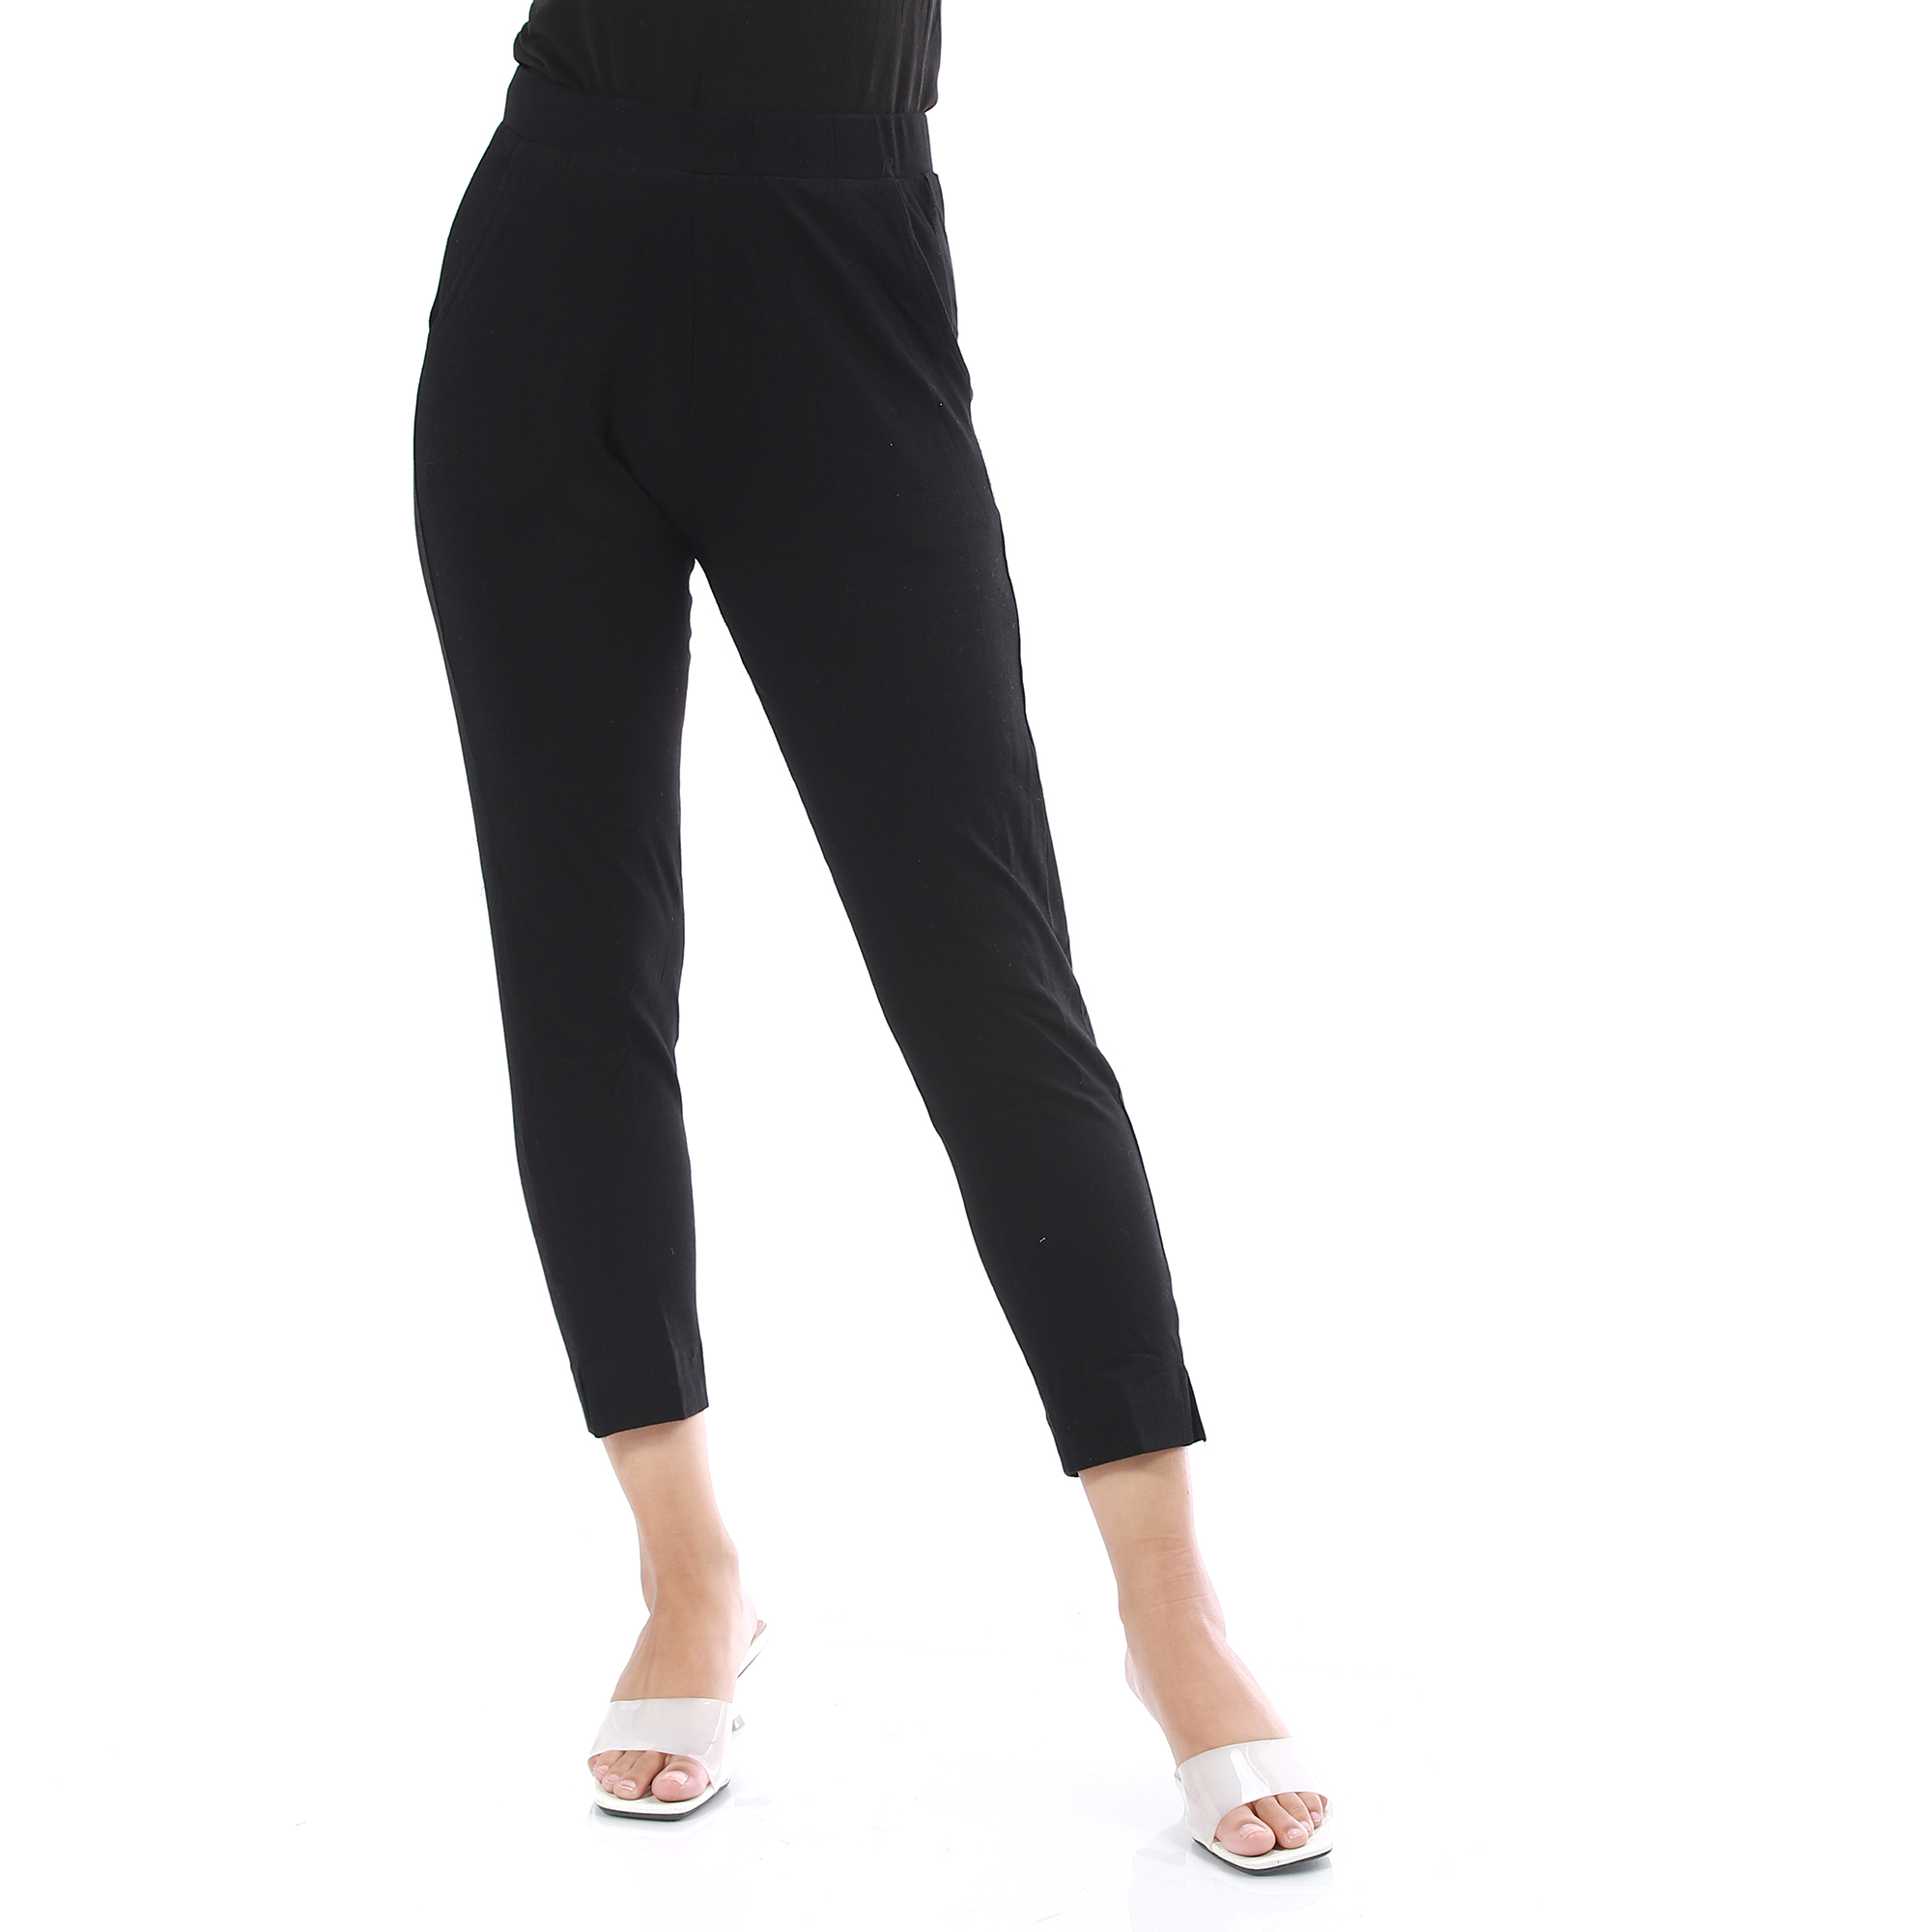 Bisesh Creation Lining Cotton Lycra Pants for women - Buy Bisesh Creation  Lining Cotton Lycra Pants for women at Best Price in SYBazzar